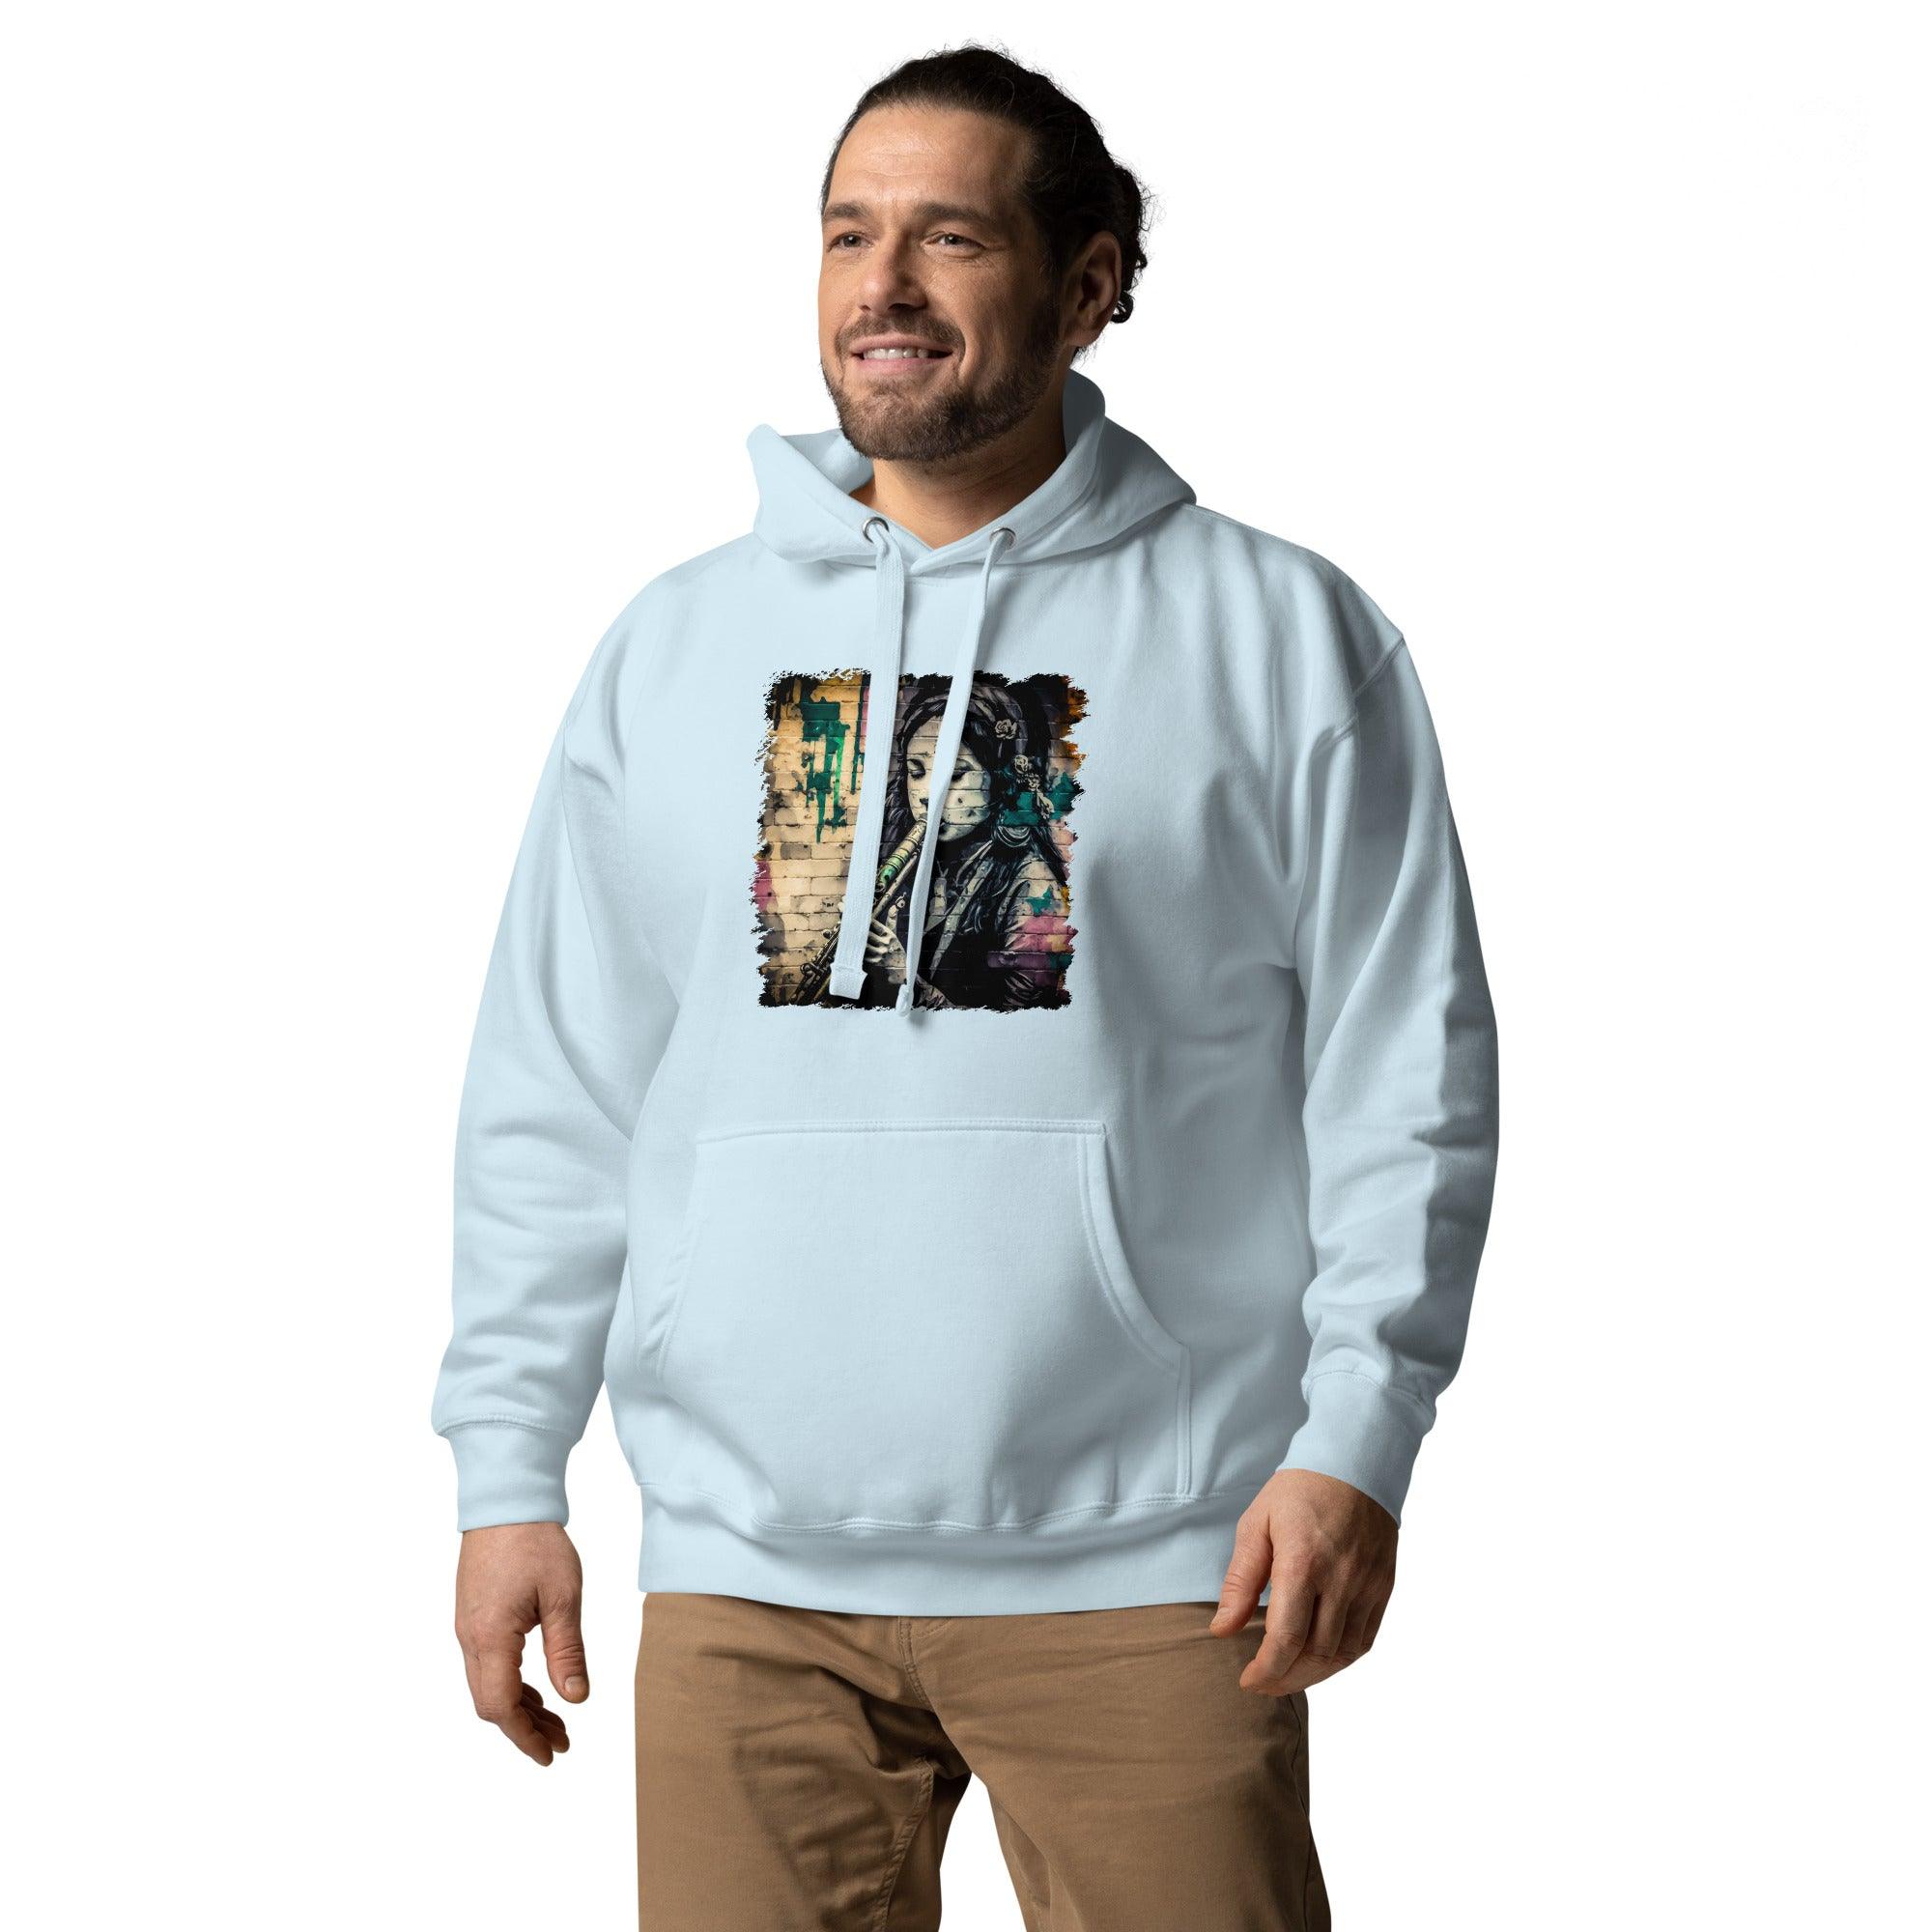 Breathing Life Into Music Unisex Hoodie - Beyond T-shirts